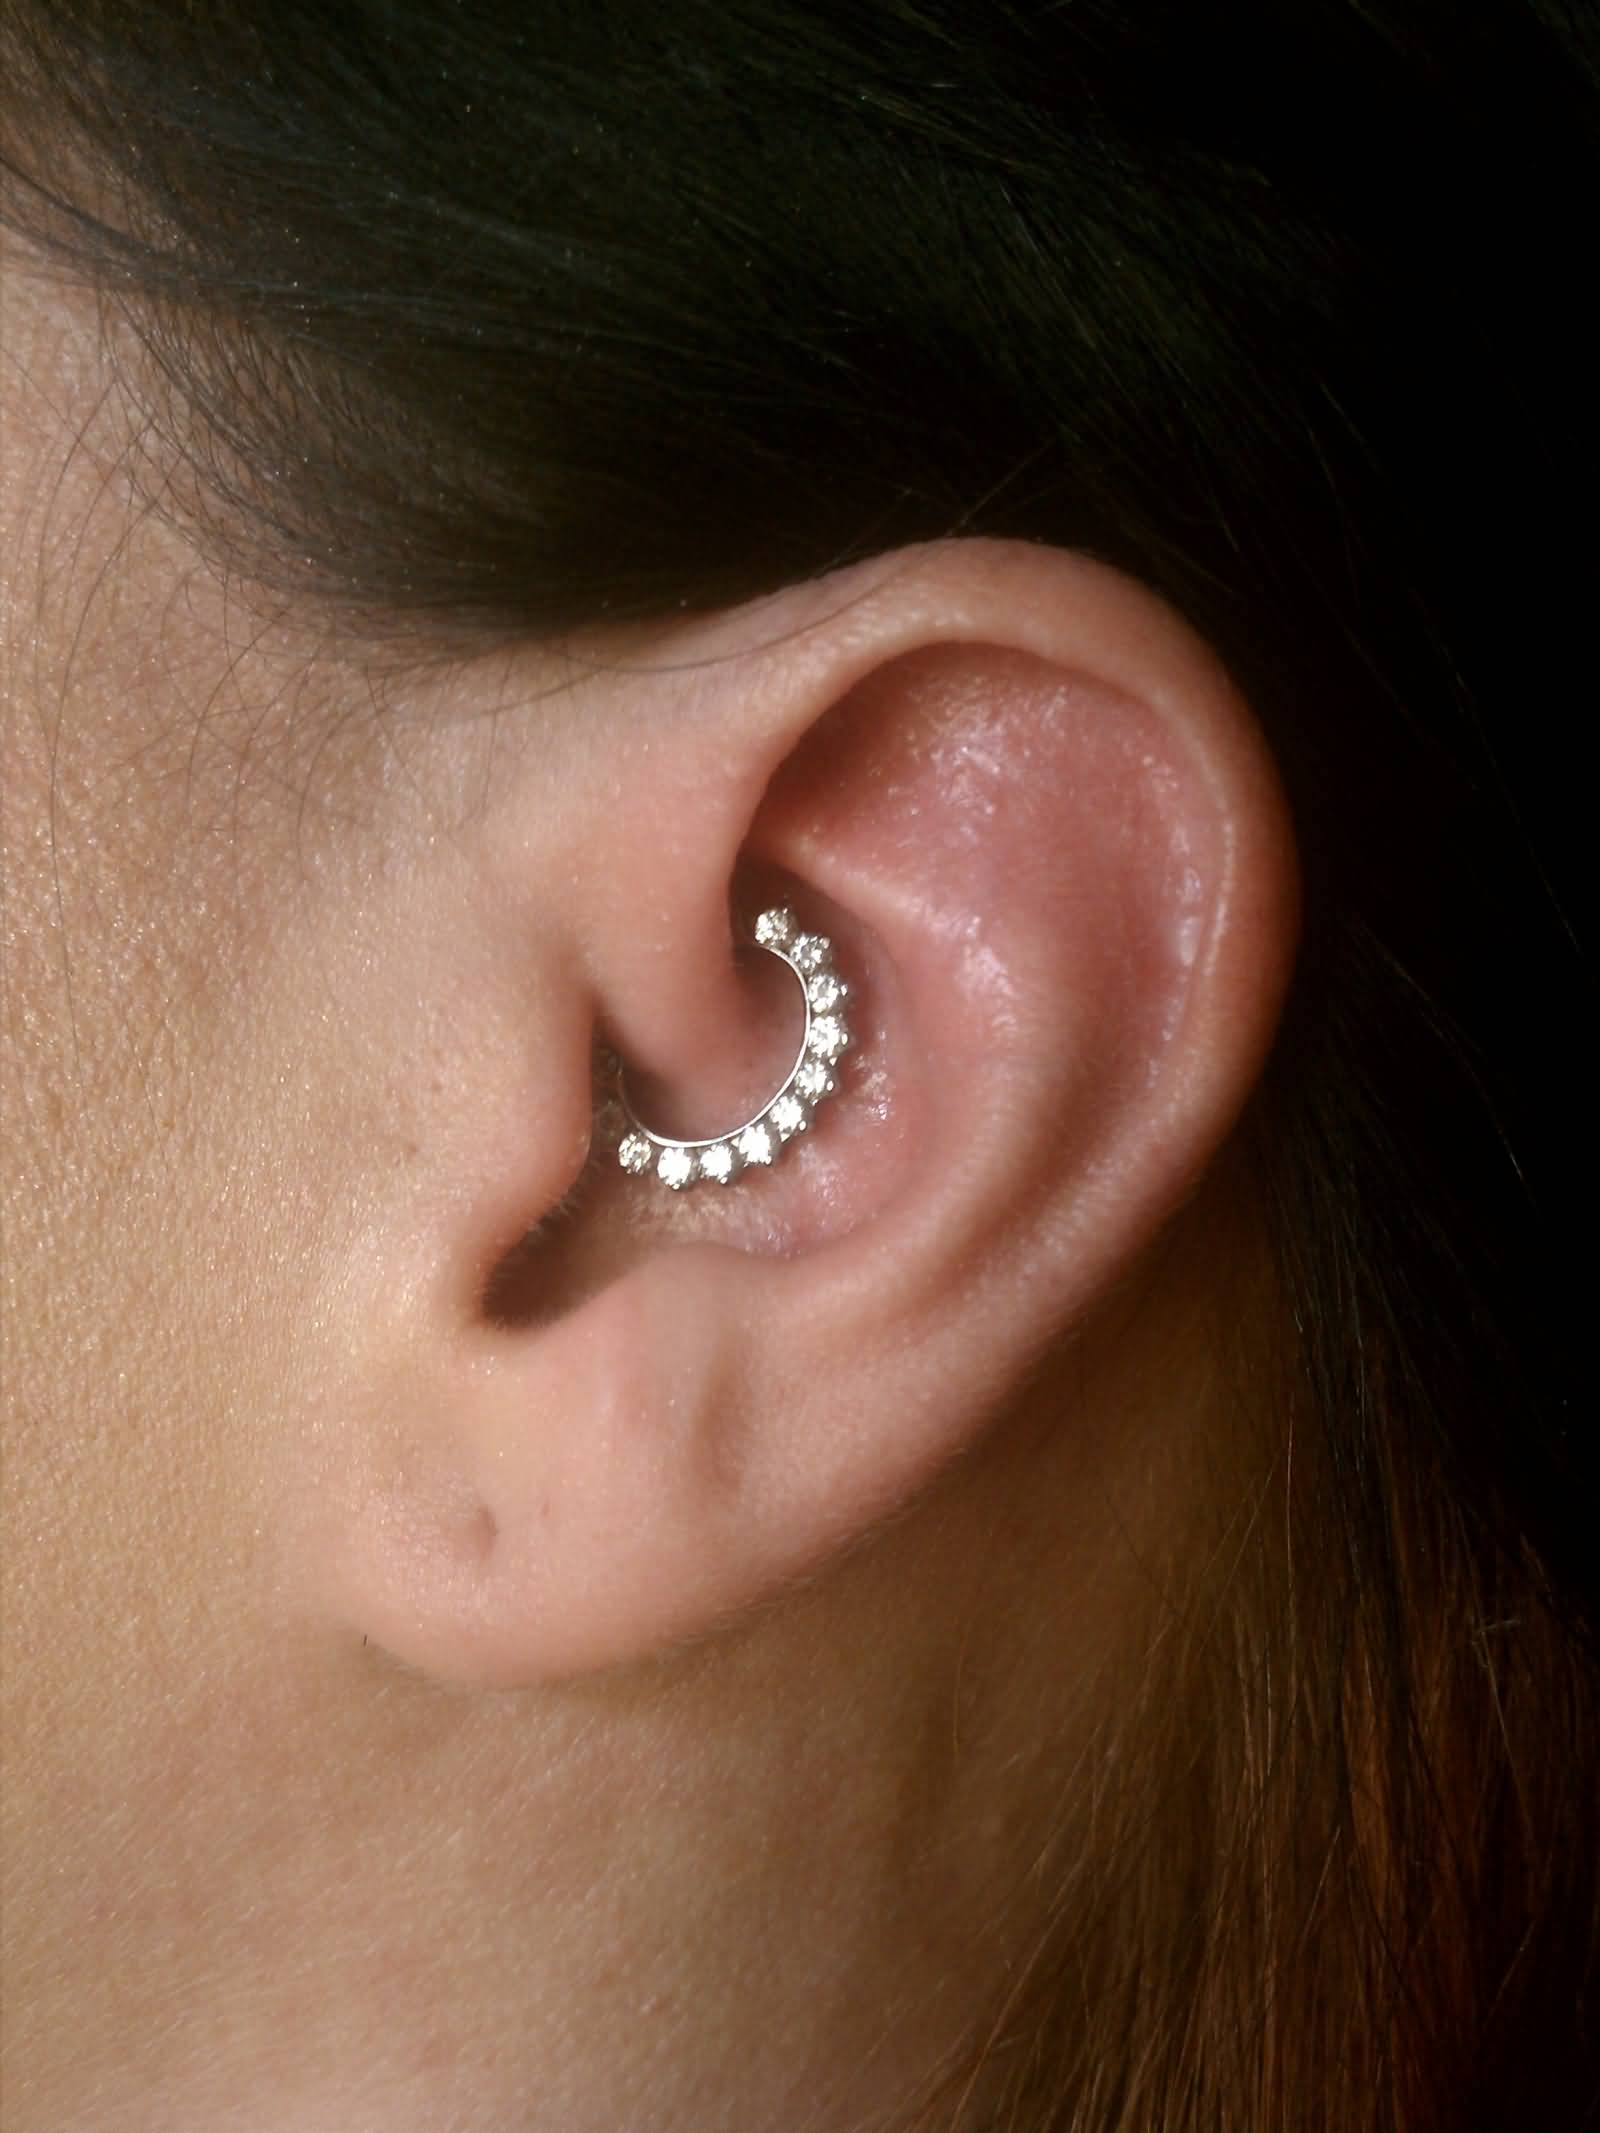 Daith Piercing With Beautiful Jewelry